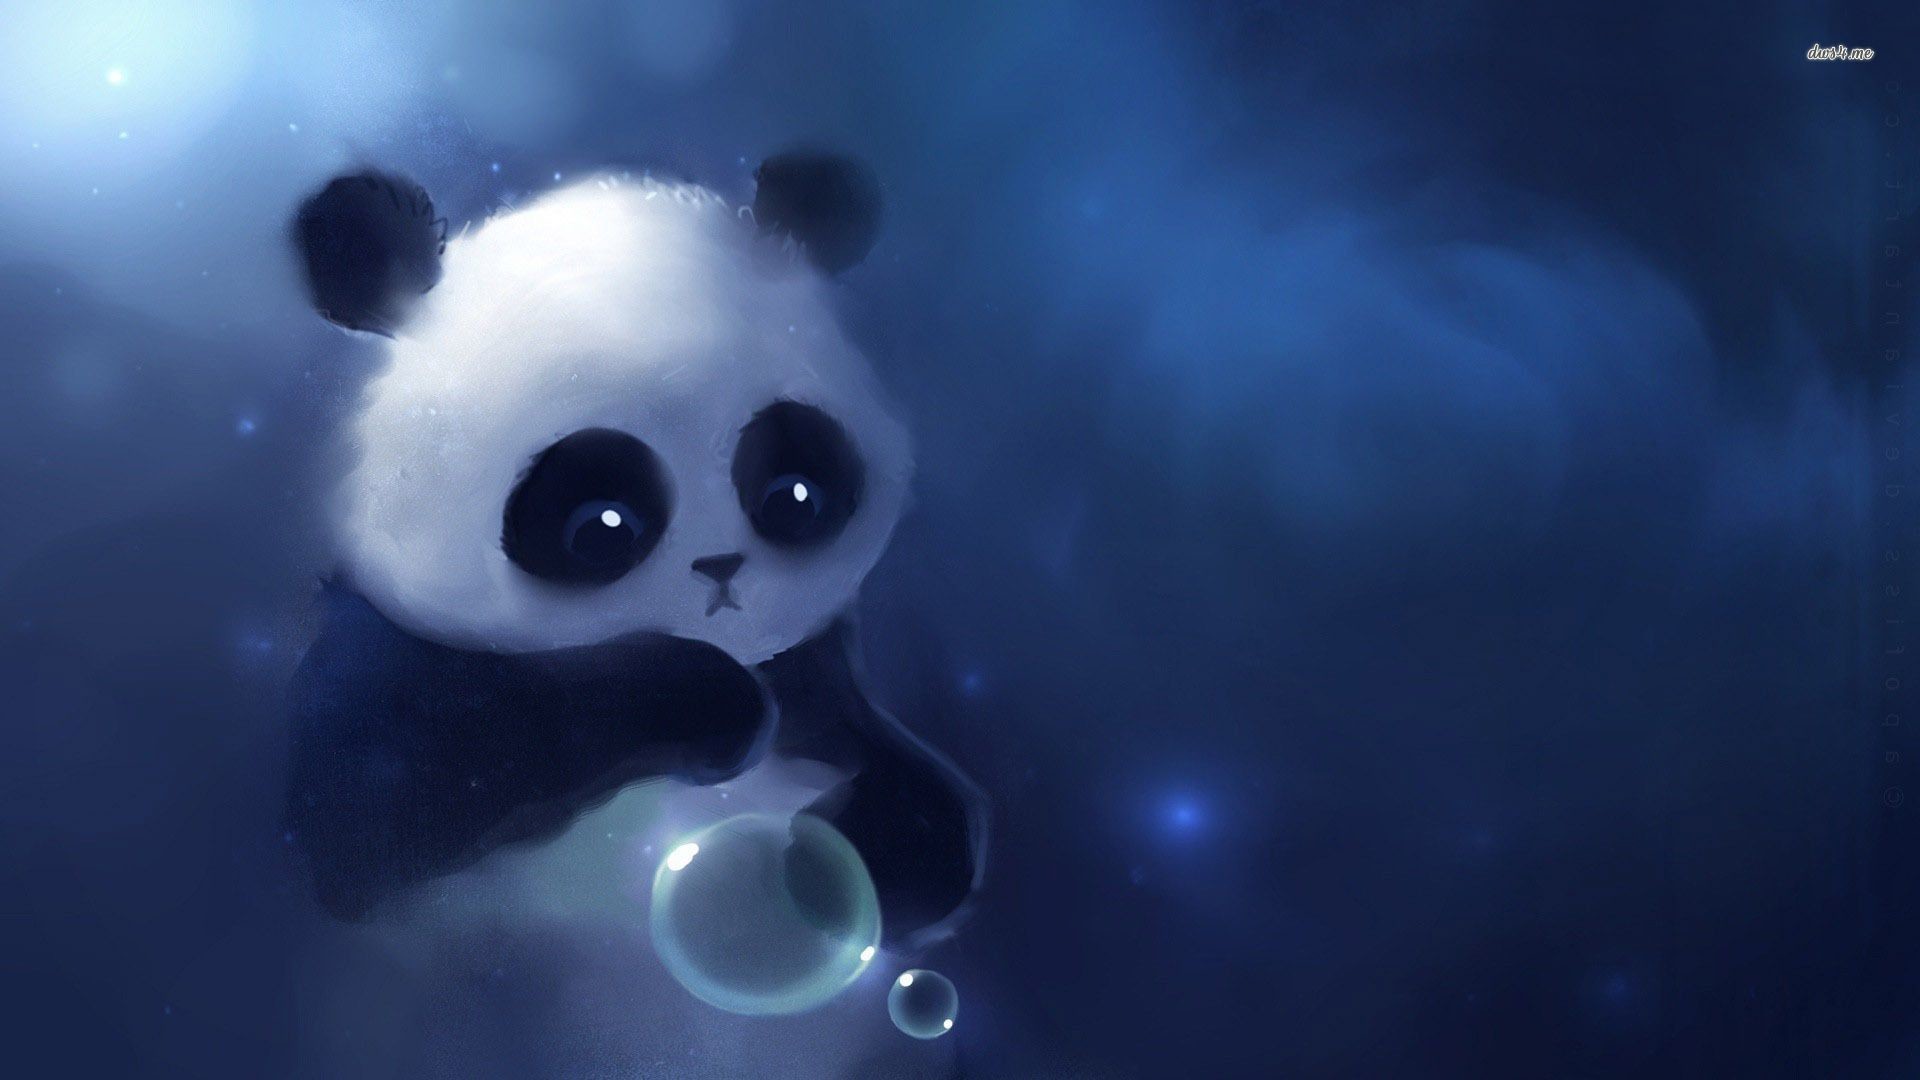 1920x1080 Search Results for “cute baby panda wallpapers” – Adorable Wallpapers